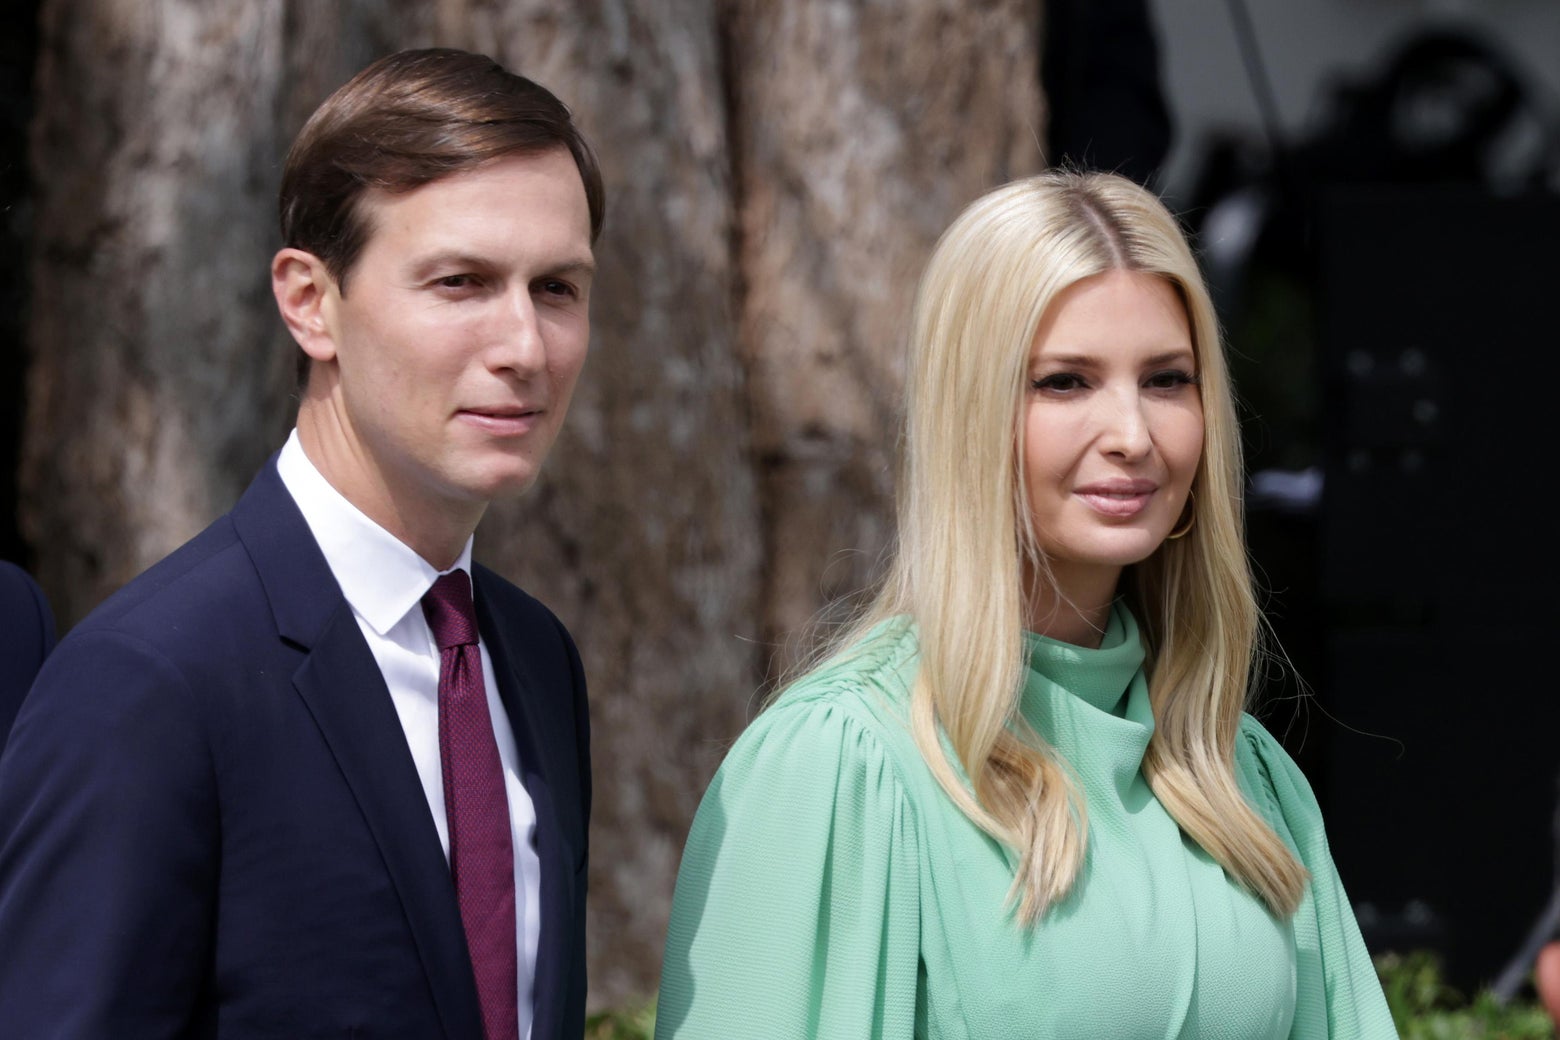 What We Might Be Able to Expect From Jared and Ivanka’s Special Counsel Testimony